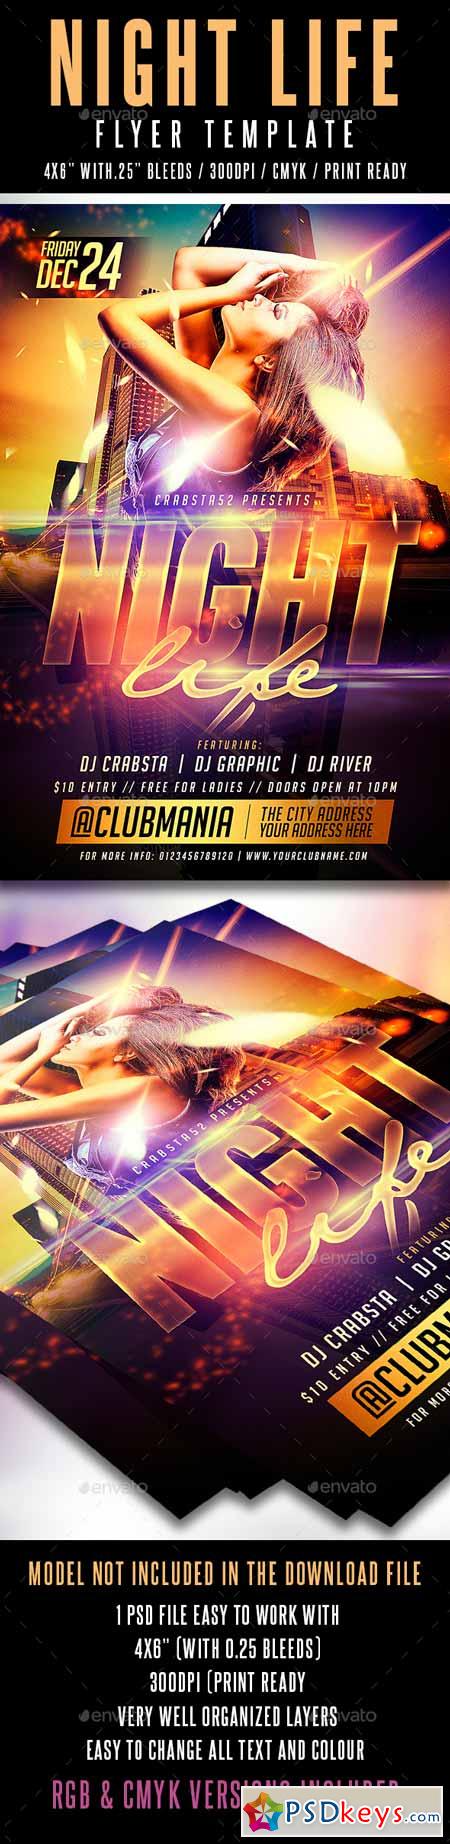 Night Life Flyer Template 13133006